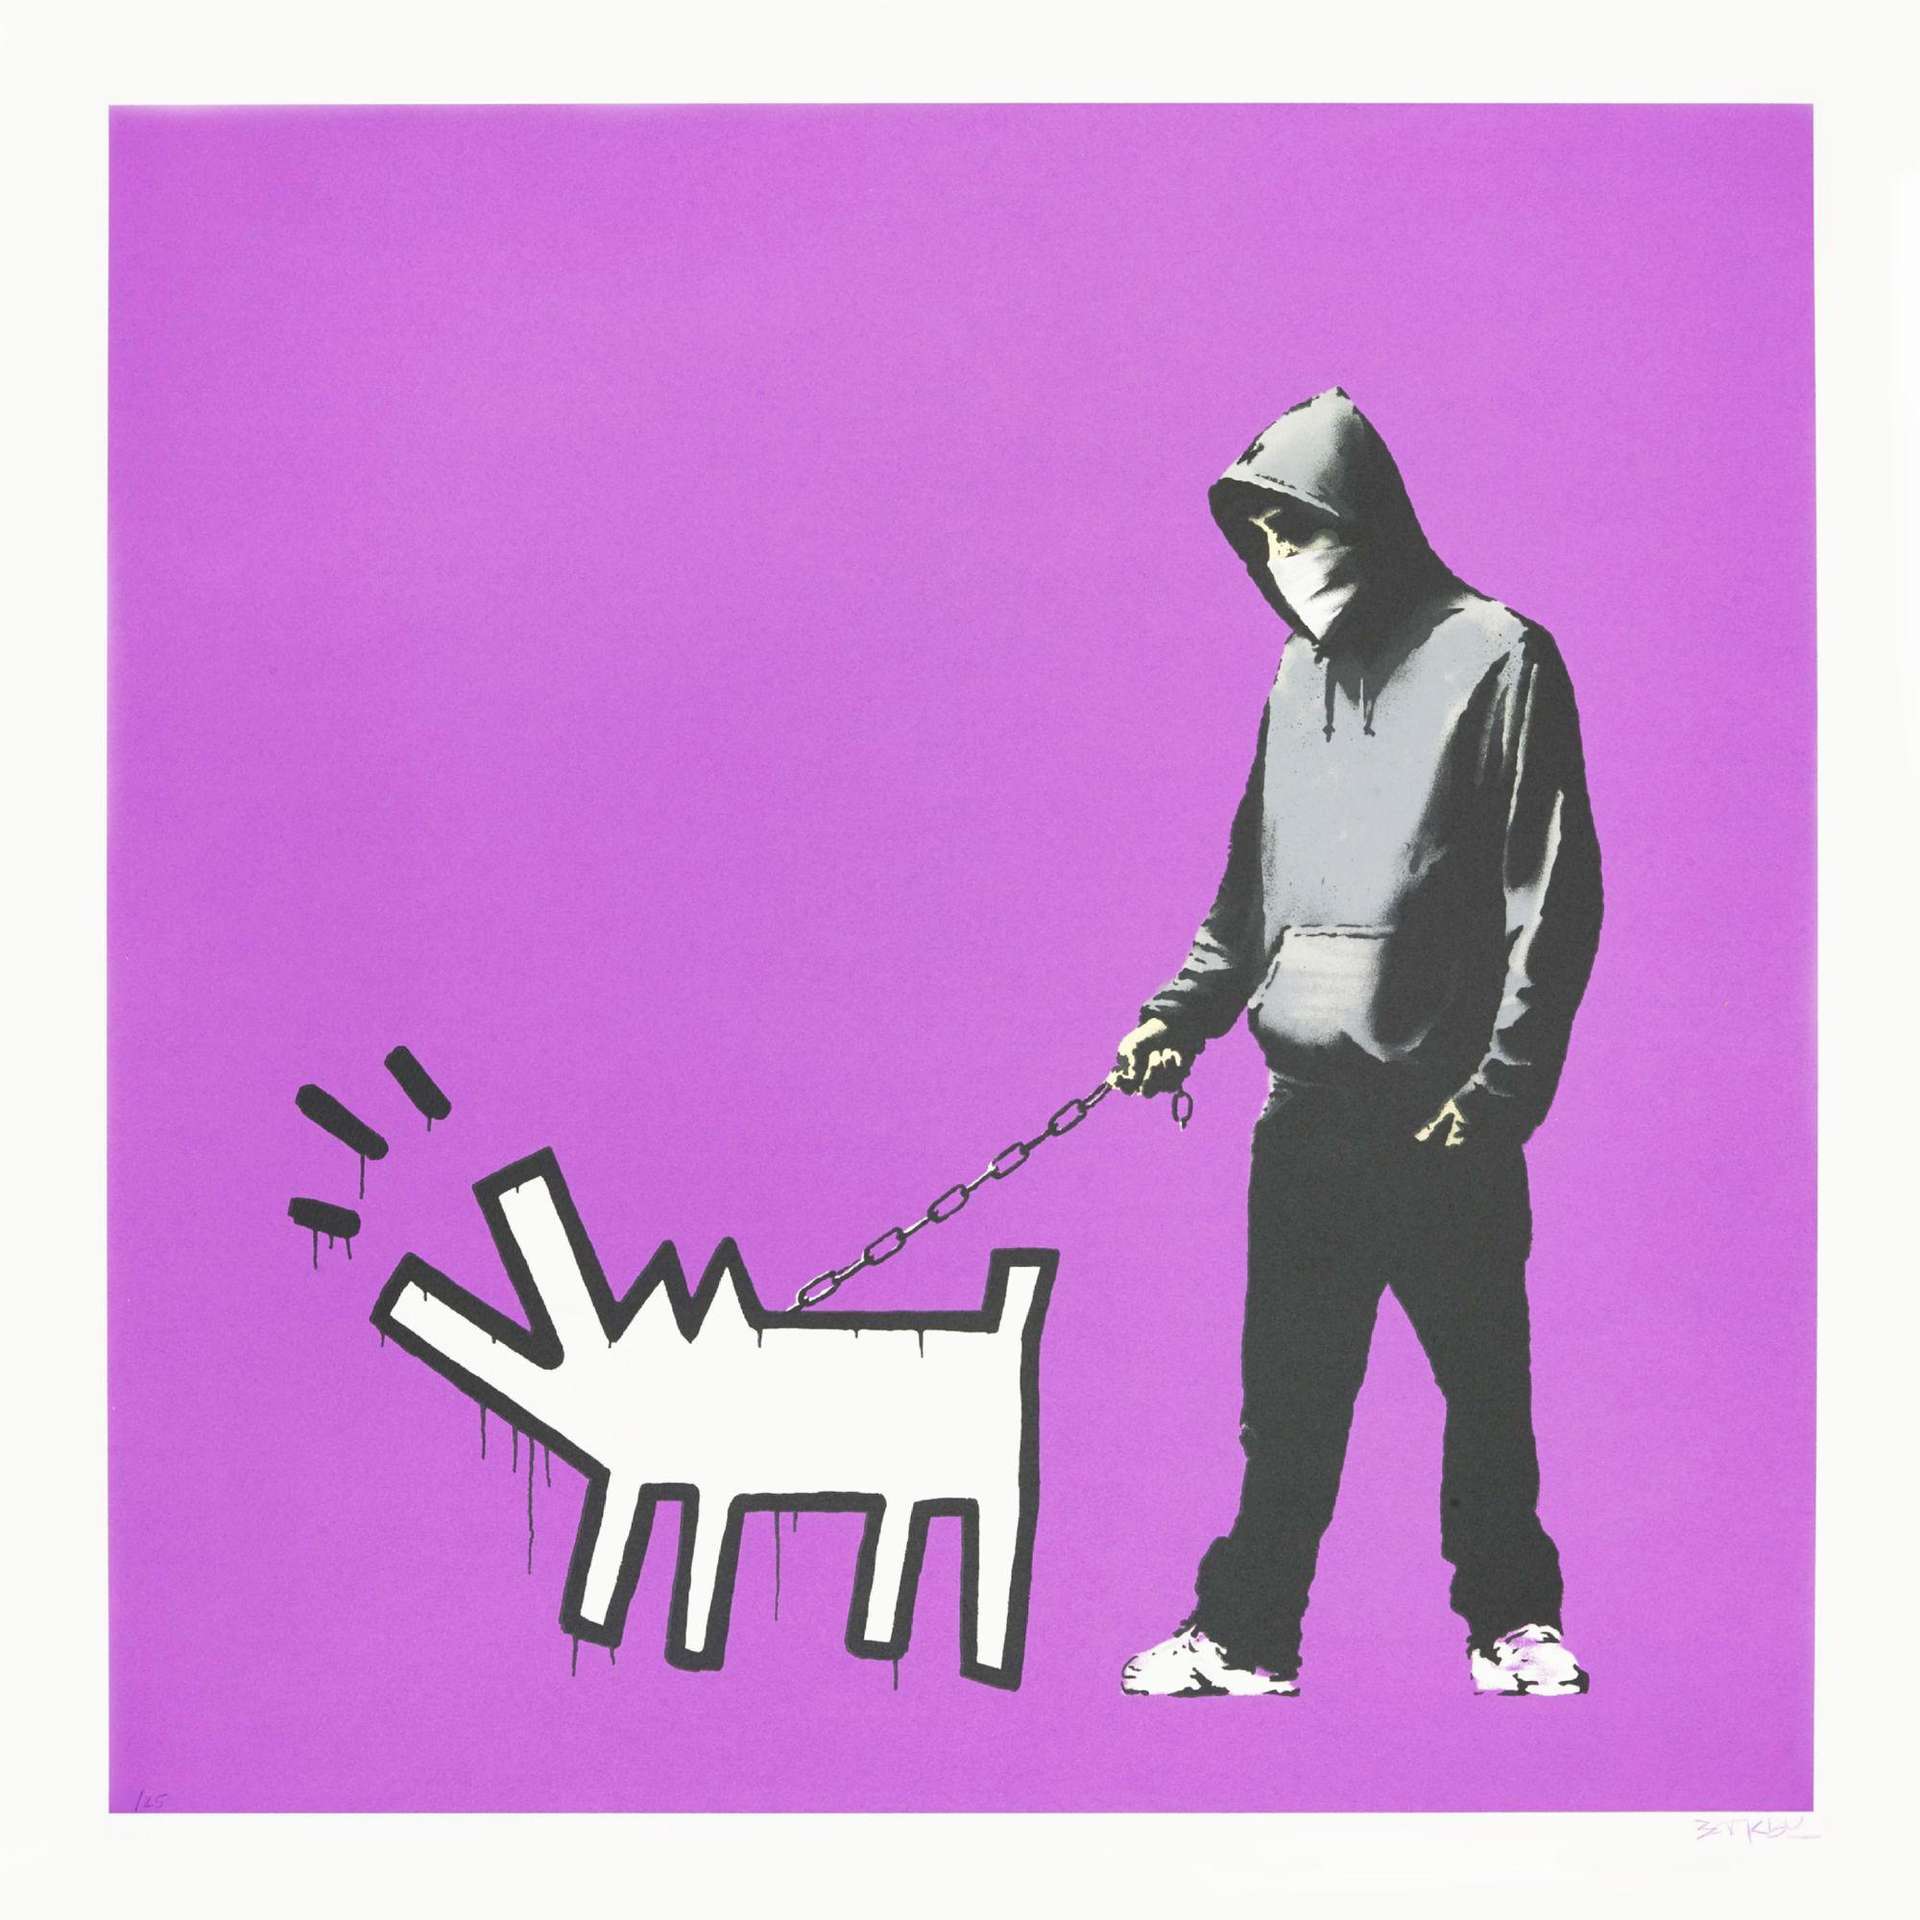 A screenprint by Banksy depicting a hooded figure holding the leash of a Keith Haring Barking Dog, set against a bright purple background.